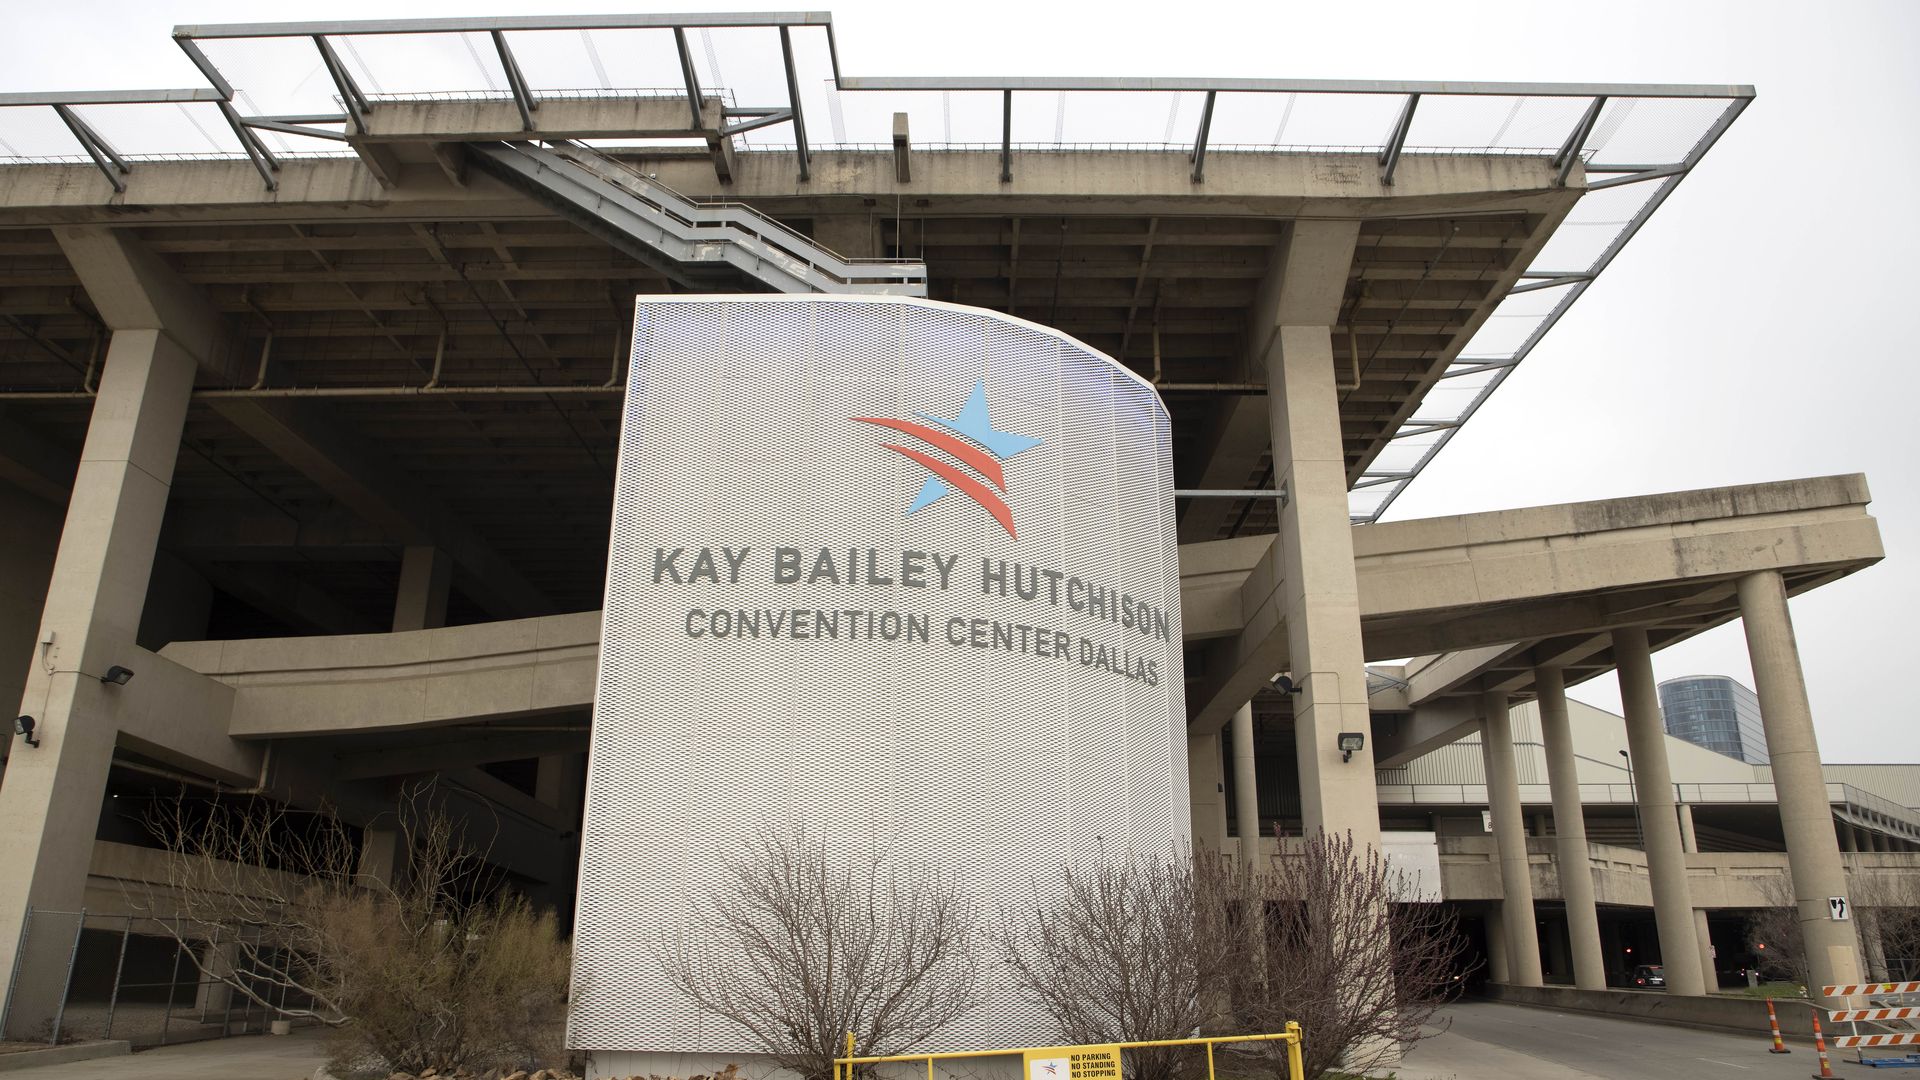 The Kay Bailey Hutchison Convention Center in Dallas, Texas.